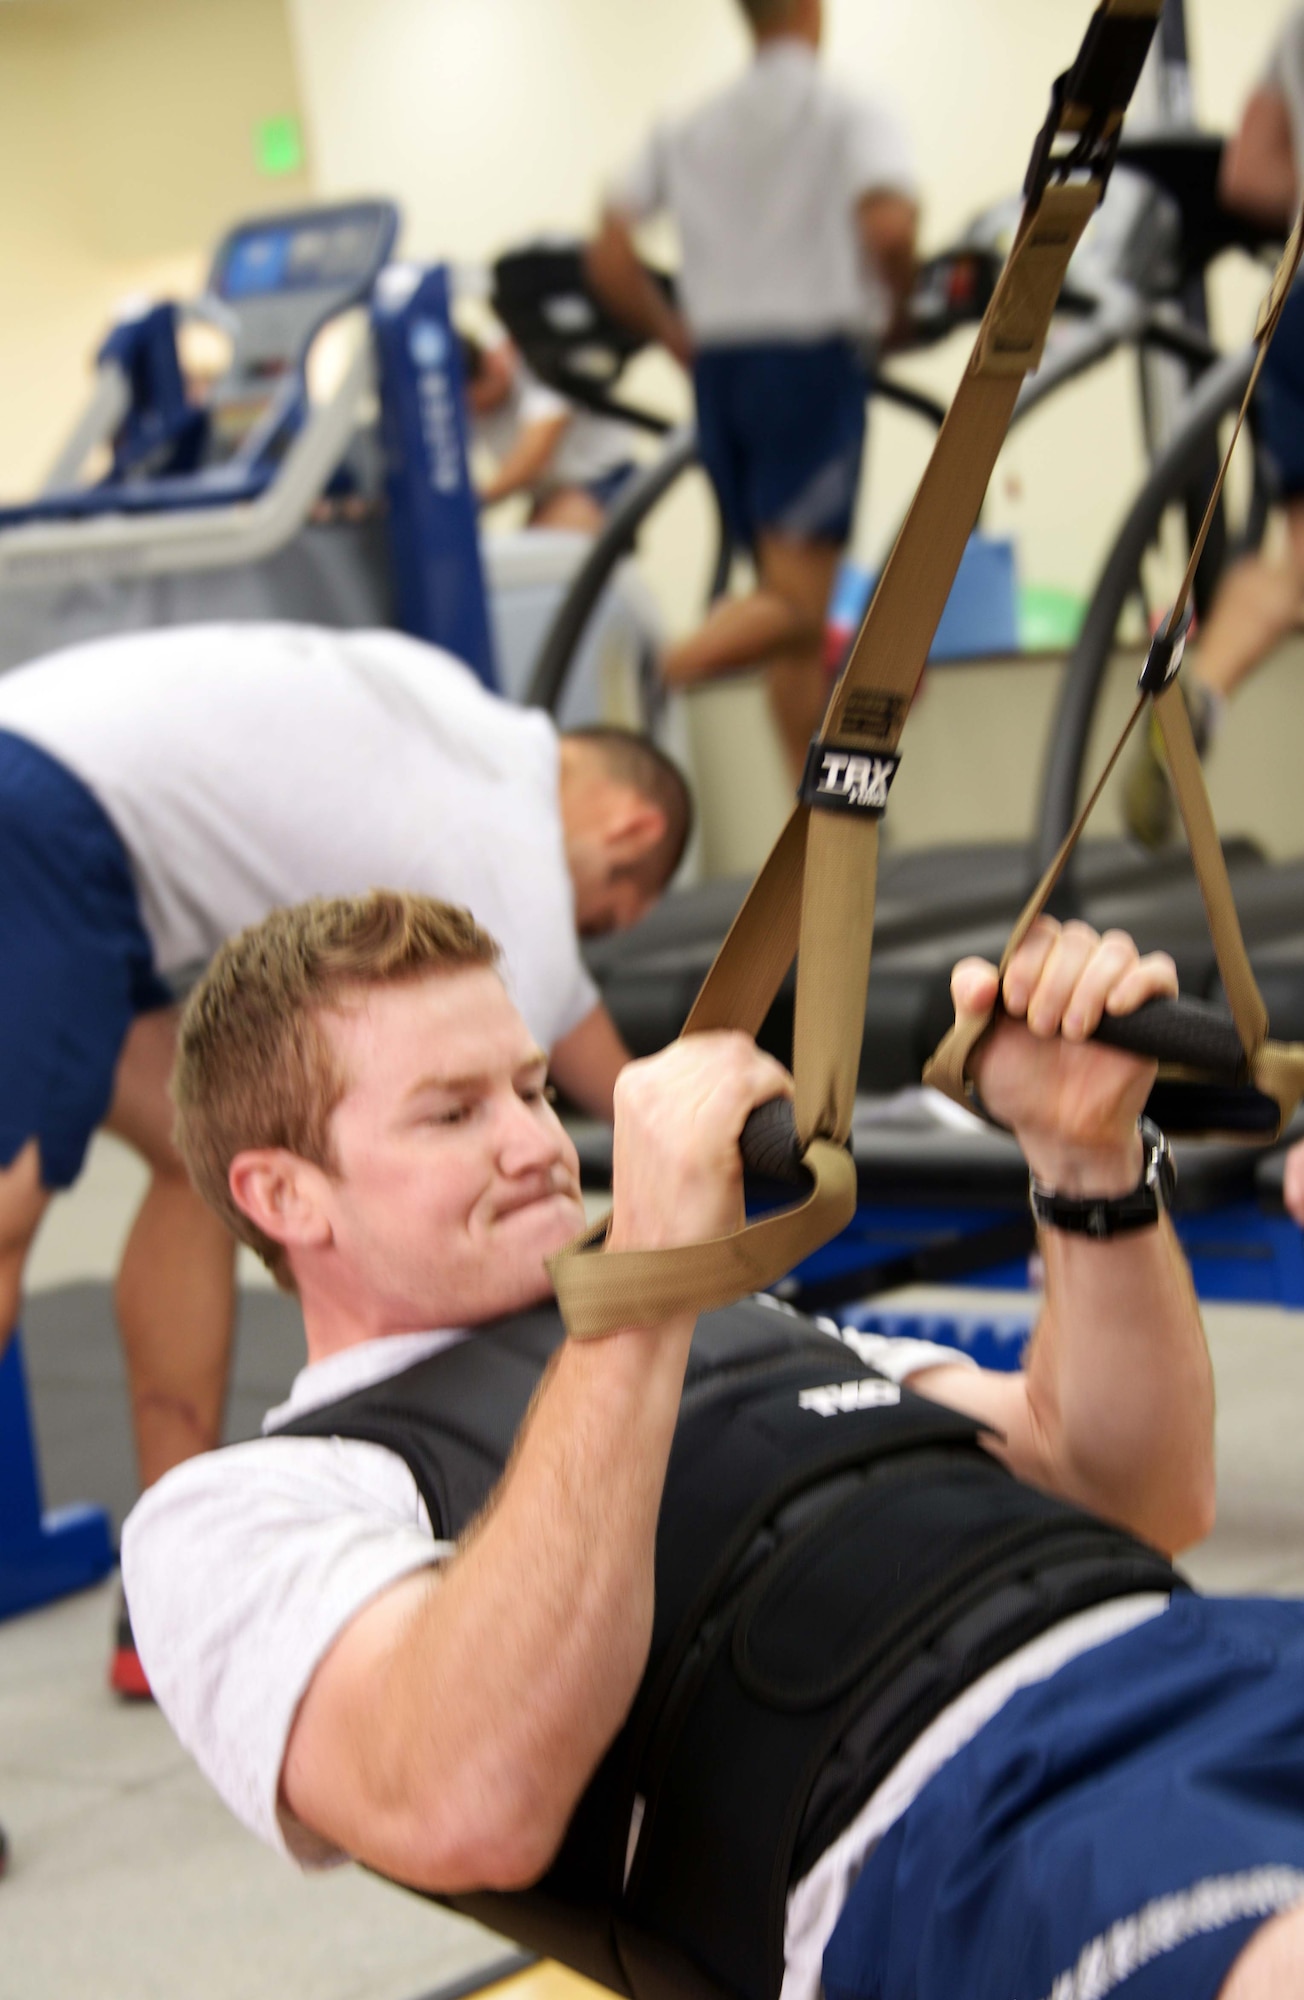 Staff Sgt. Patrick Harrington, 320th Special Tactics Squadron, works out in the Human Performance Training Center, during squadron physical training March 22 at Kadena Air Base.  The HPTC houses the human performance program, which focuses on not only strengthening the battlefield Airman physically, but also rehabilitating the individual ensuring the Air Force’s human weapons system is performing to its maximum potential for as long as possible. (U.S. Air Force photo by Tech. Sgt. Kristine Dreyer)